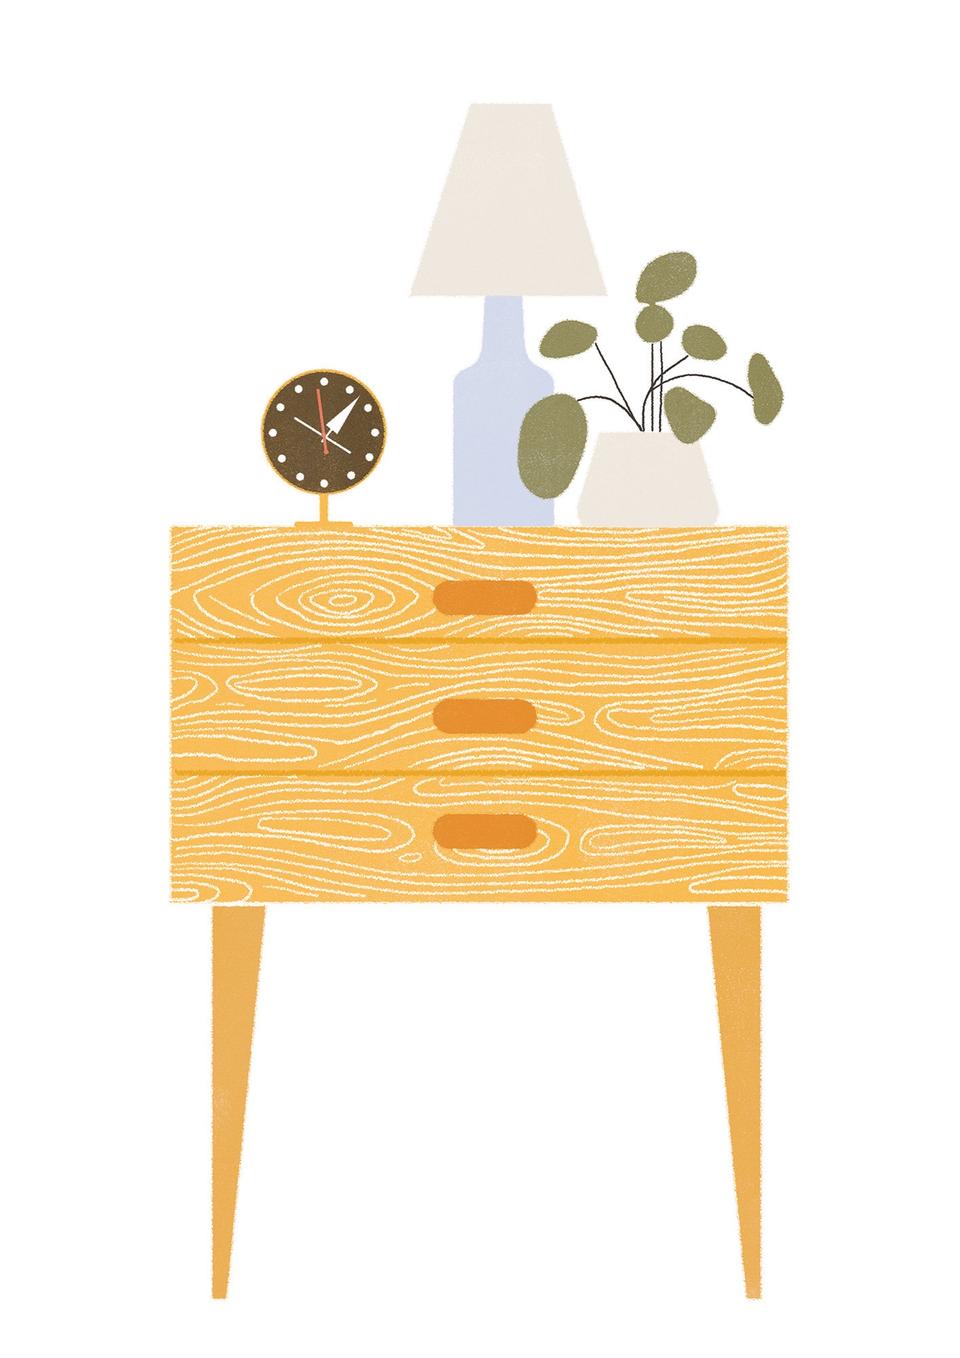 Illustration of mid-century style nightstand with lamp, Vitra Nelson clock and peperomia plantpeper